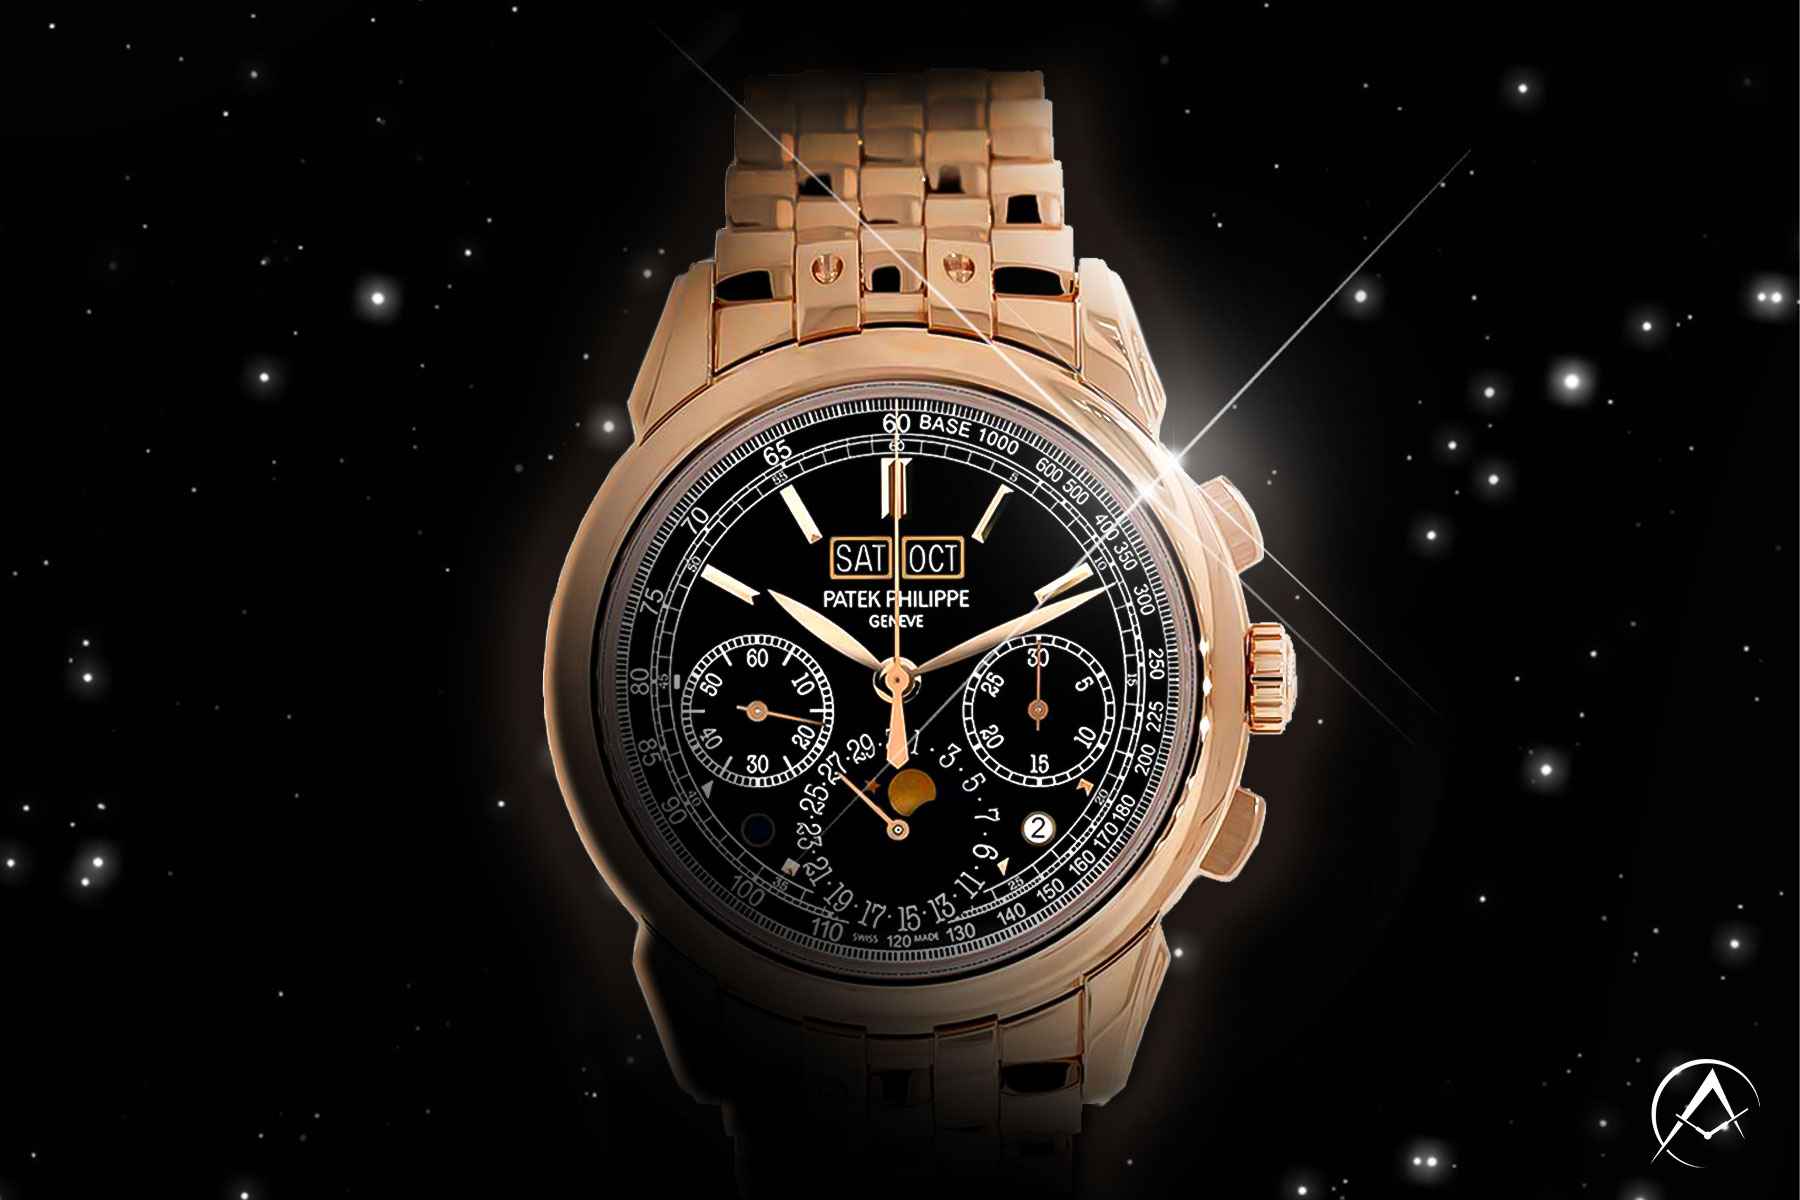 Patek Philippe Grand Complications, 18K Rose Gold, Black Index Dial on a Black Starry Background